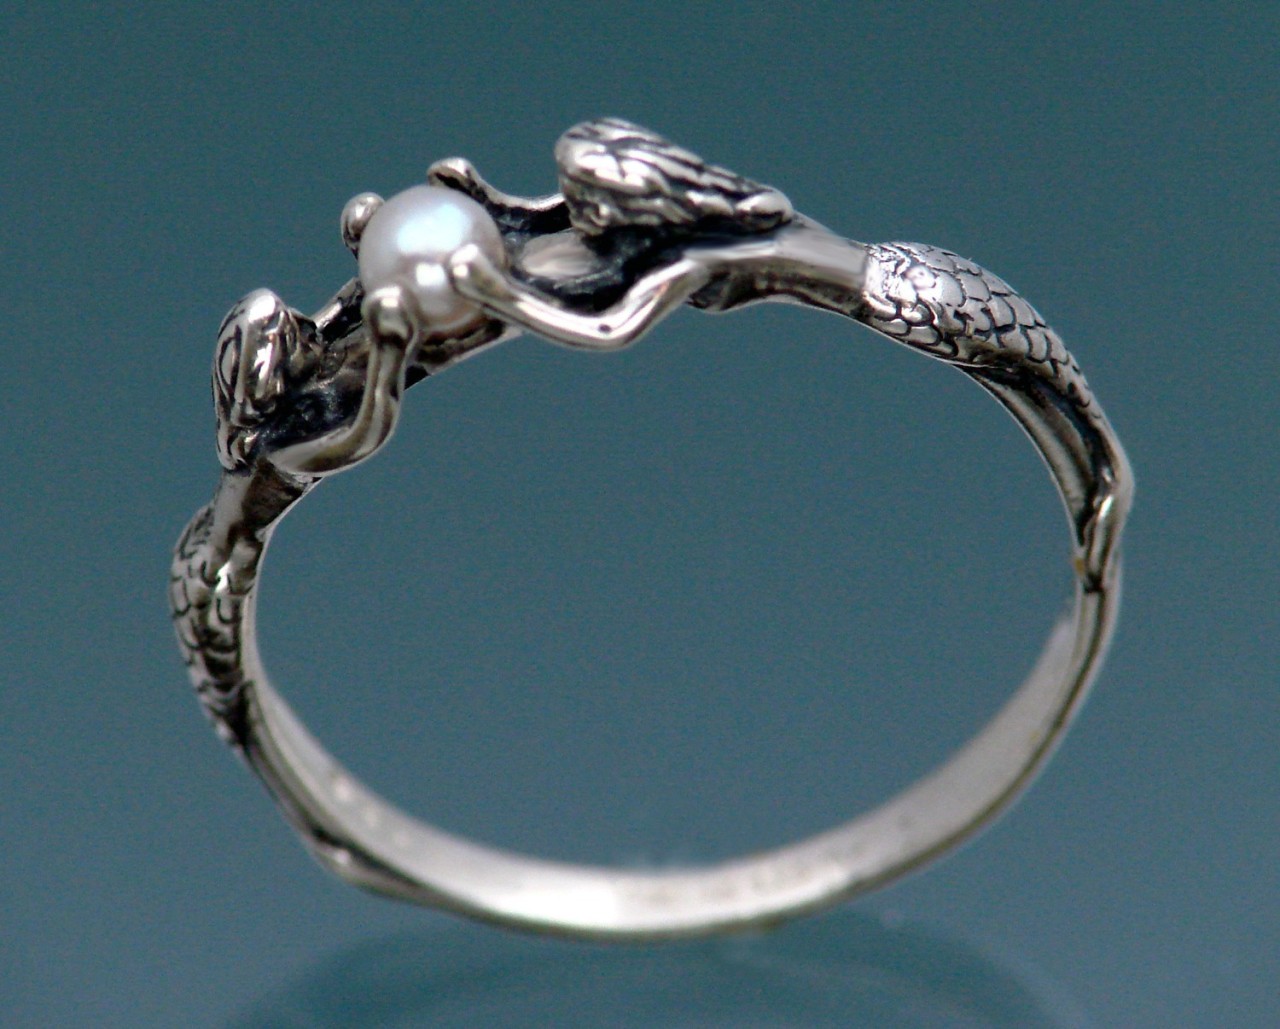  Twin Mermaid Ring Mermaids are one of the most widely known myths of the sea in